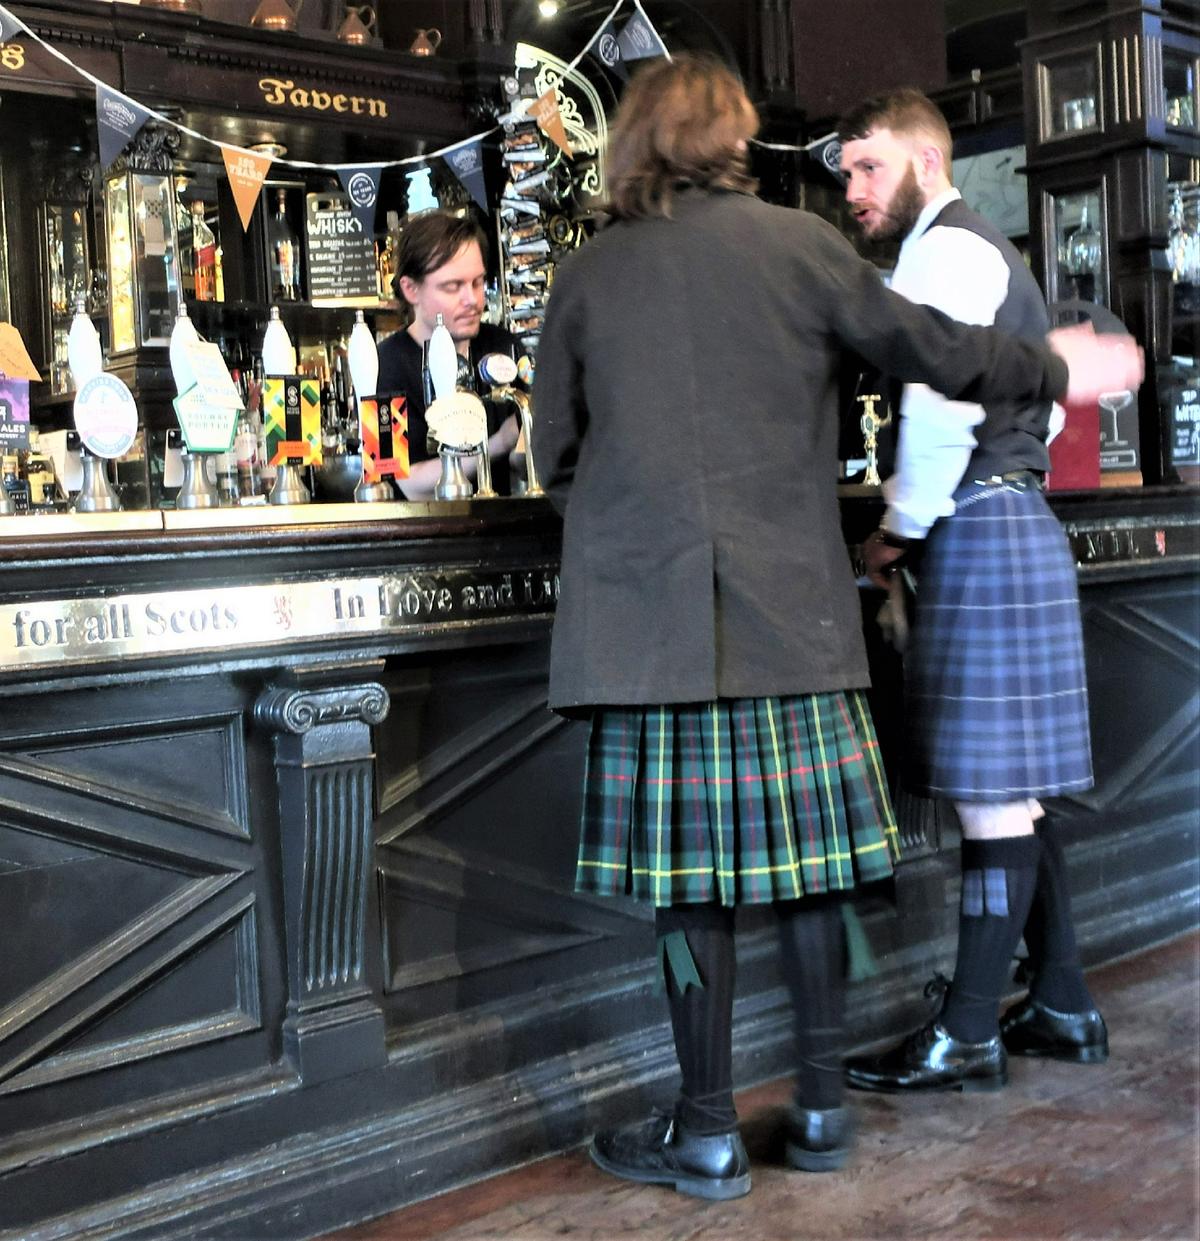 Kilts are worn in everyday situations all over Scotland. (Victor Block)